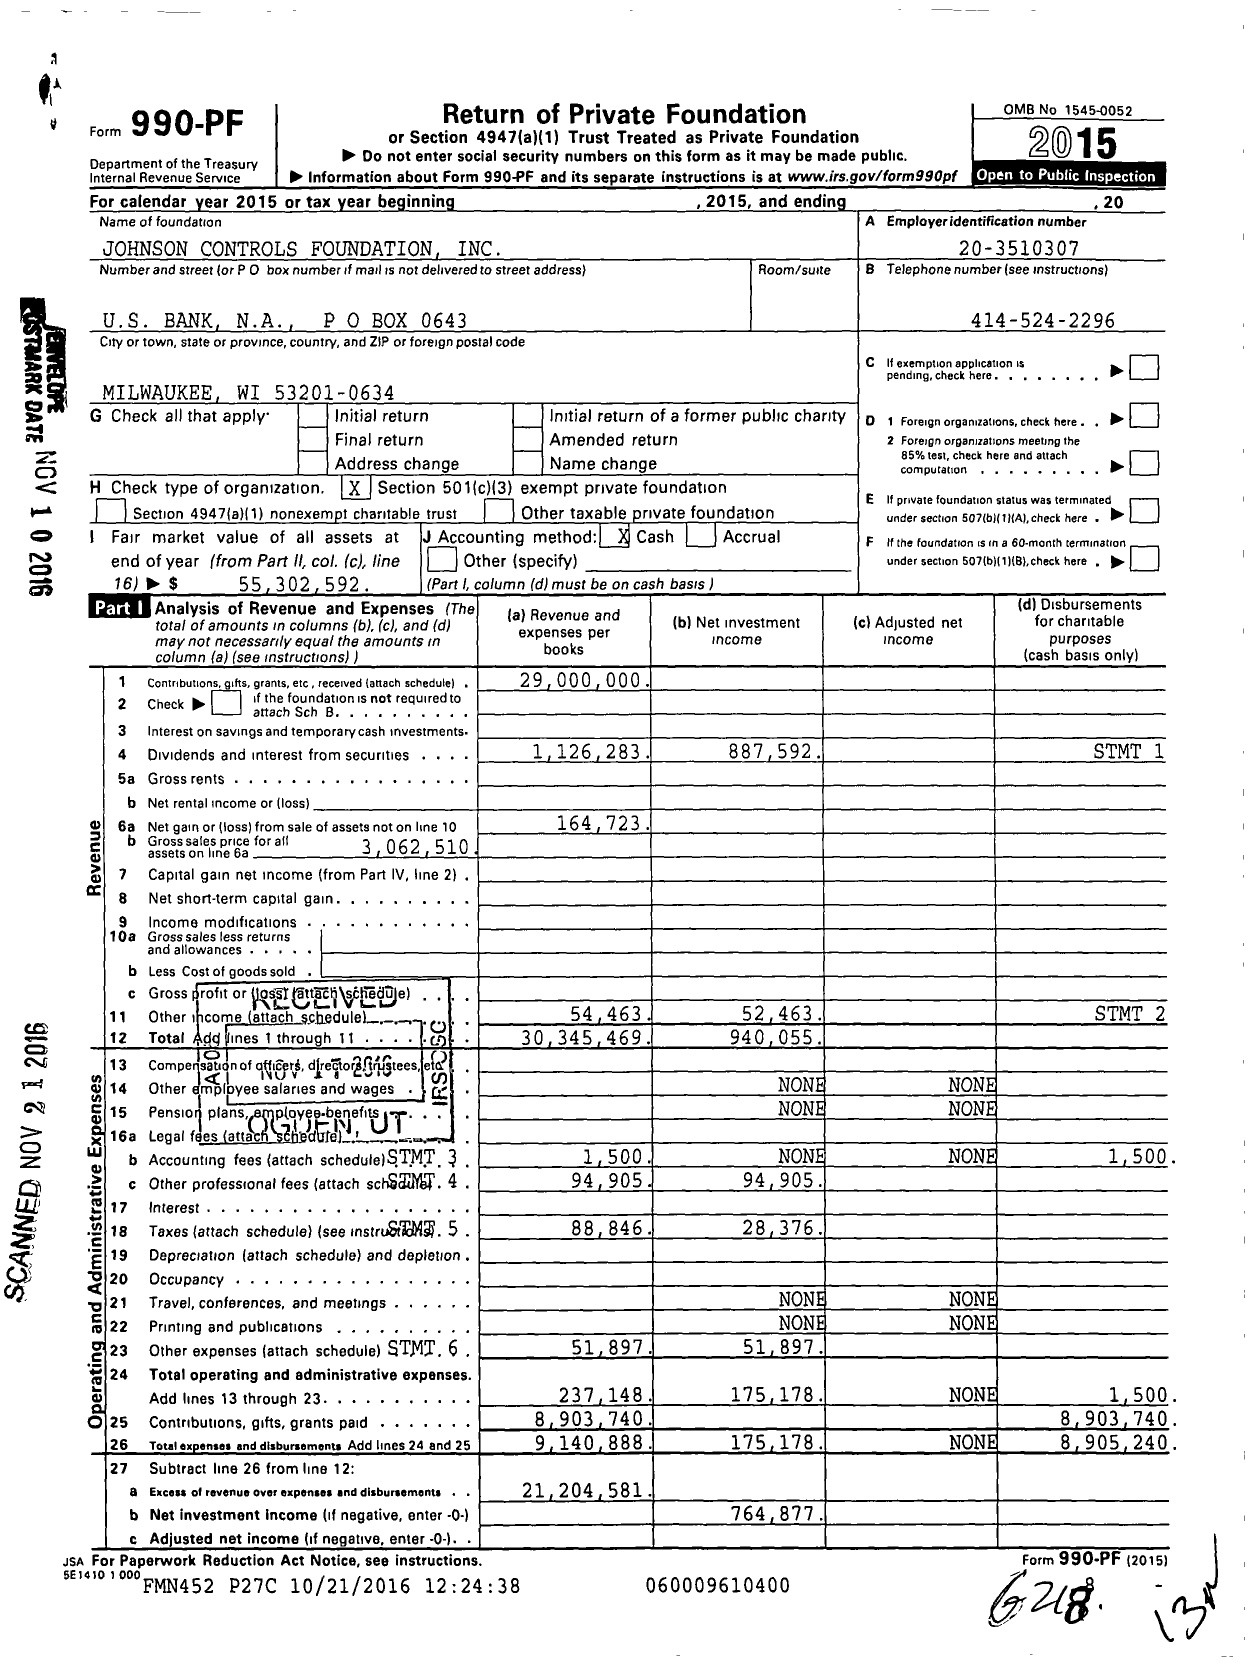 Image of first page of 2015 Form 990PF for Johnson Controls Foundation